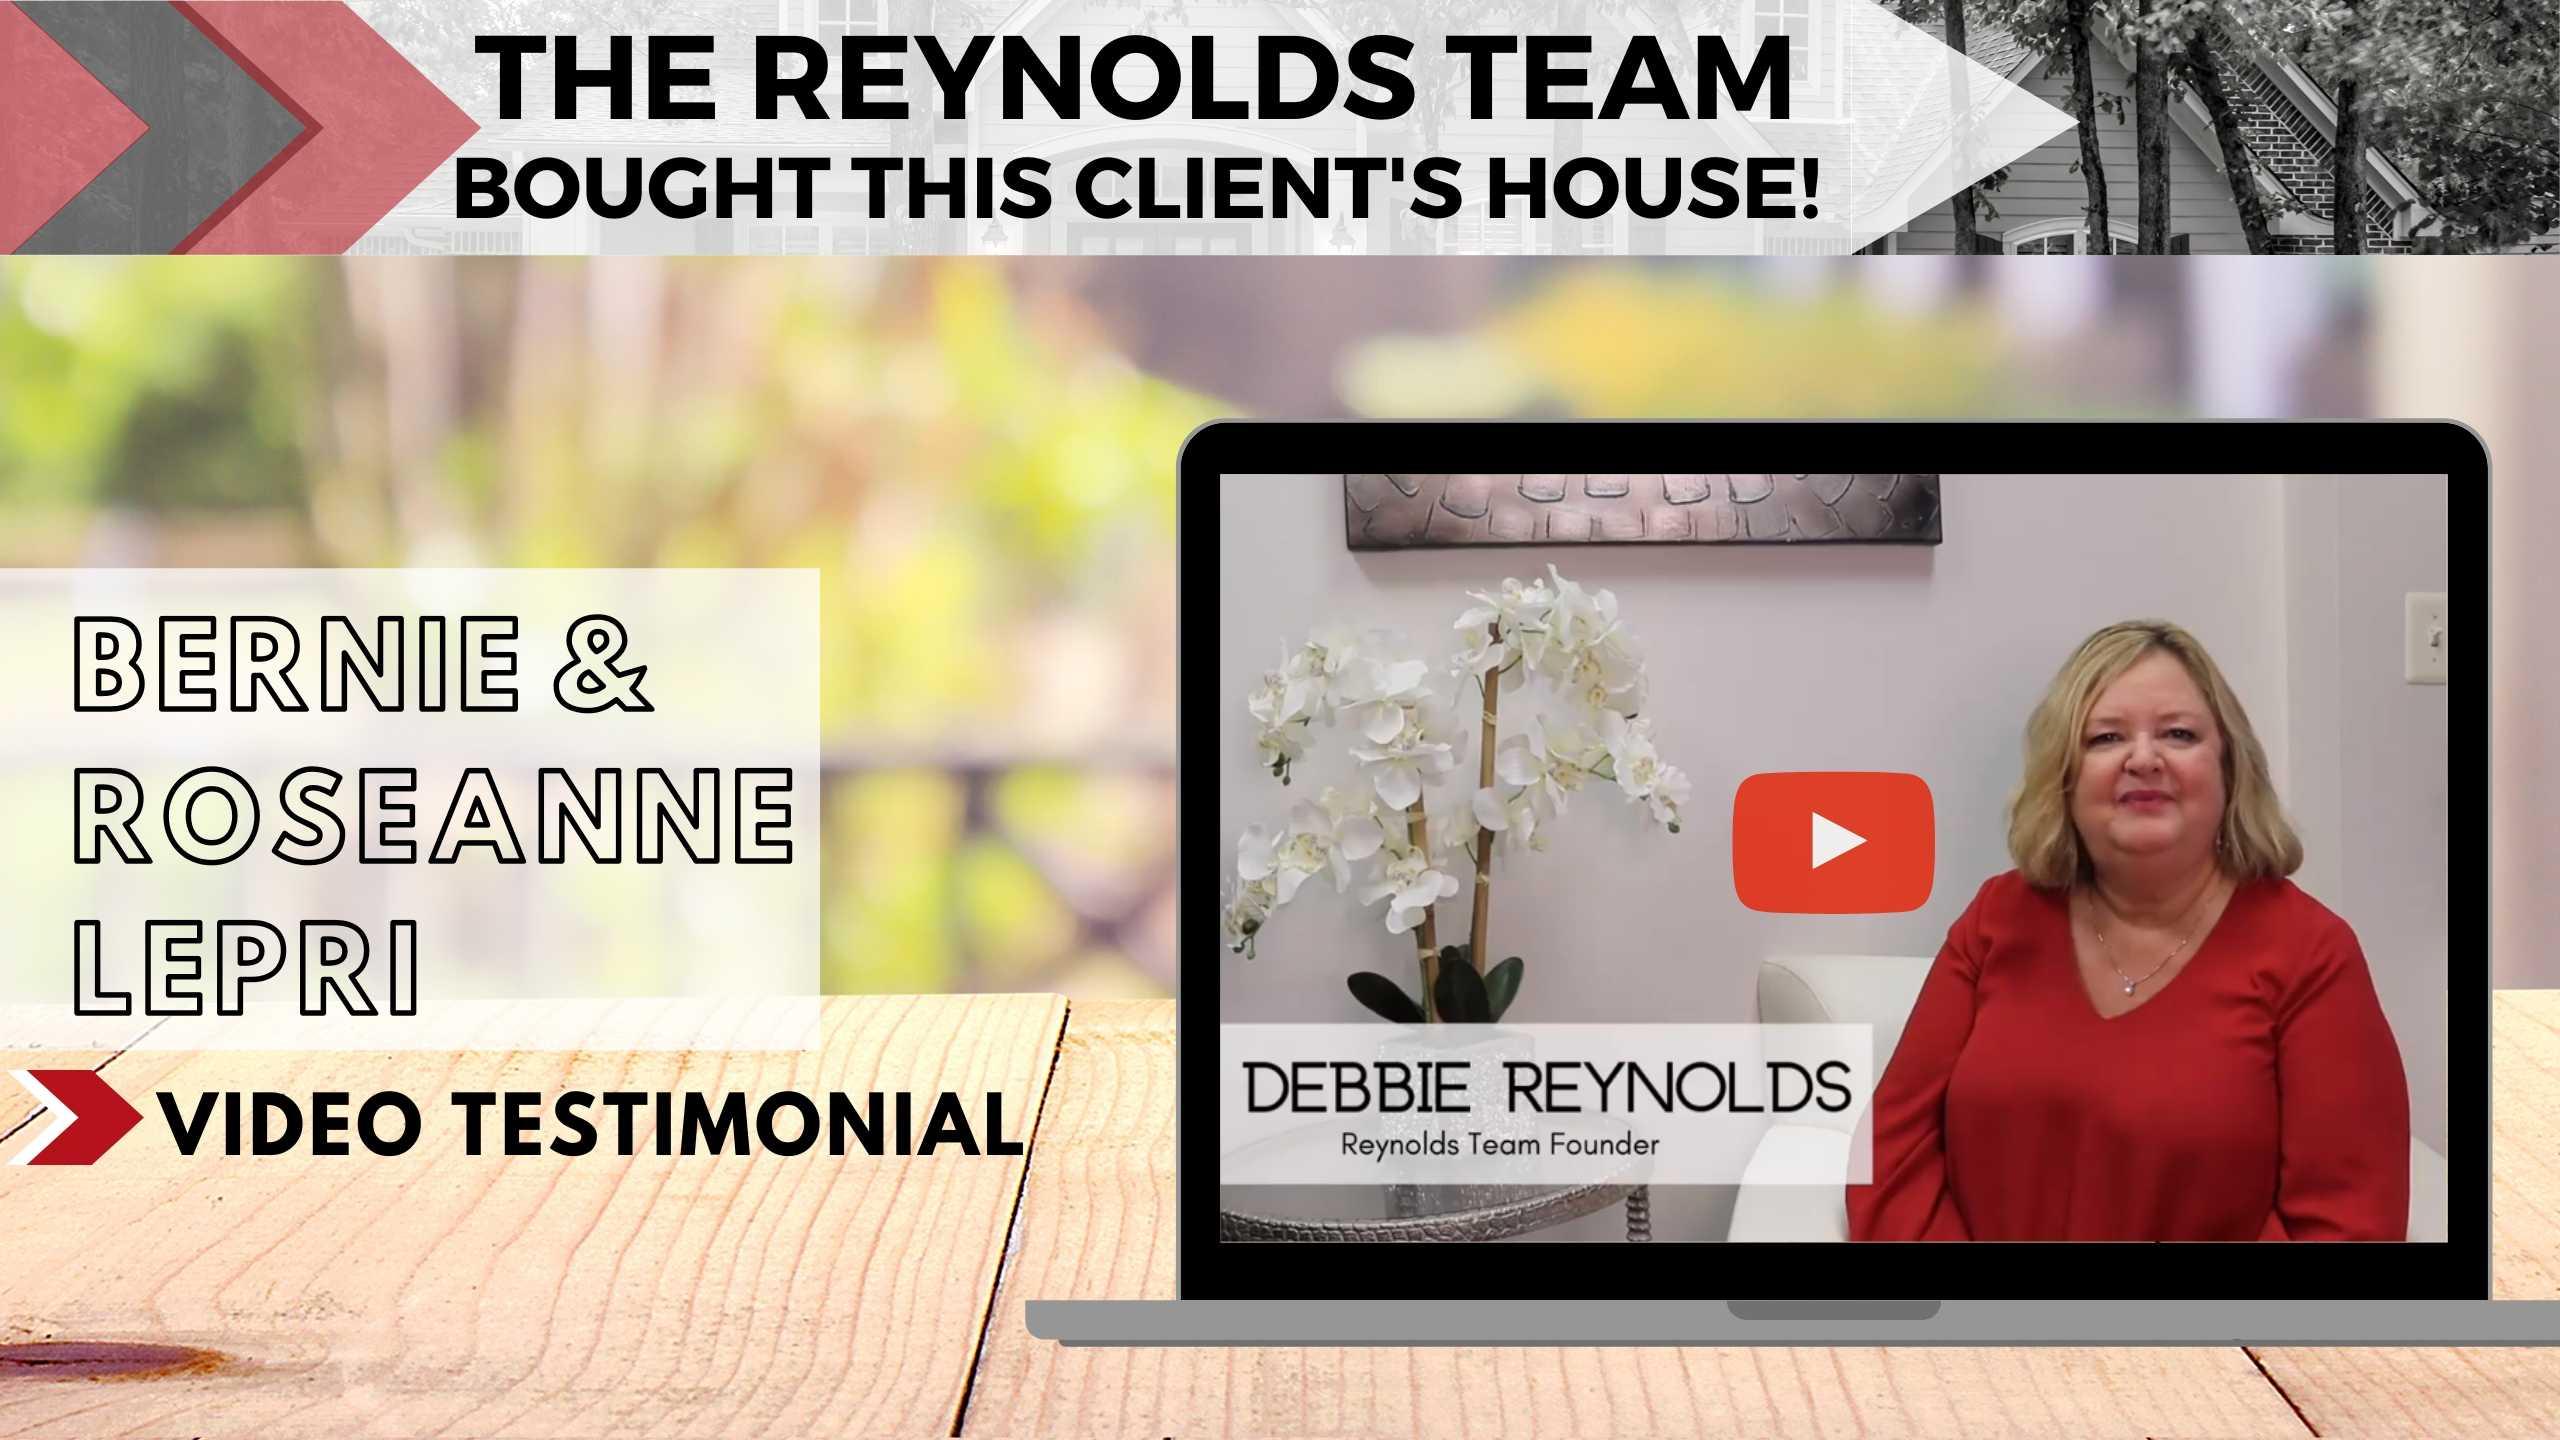 THE REYNOLDS TEAM BOUGHT THIS CLIENT’S HOUSE!